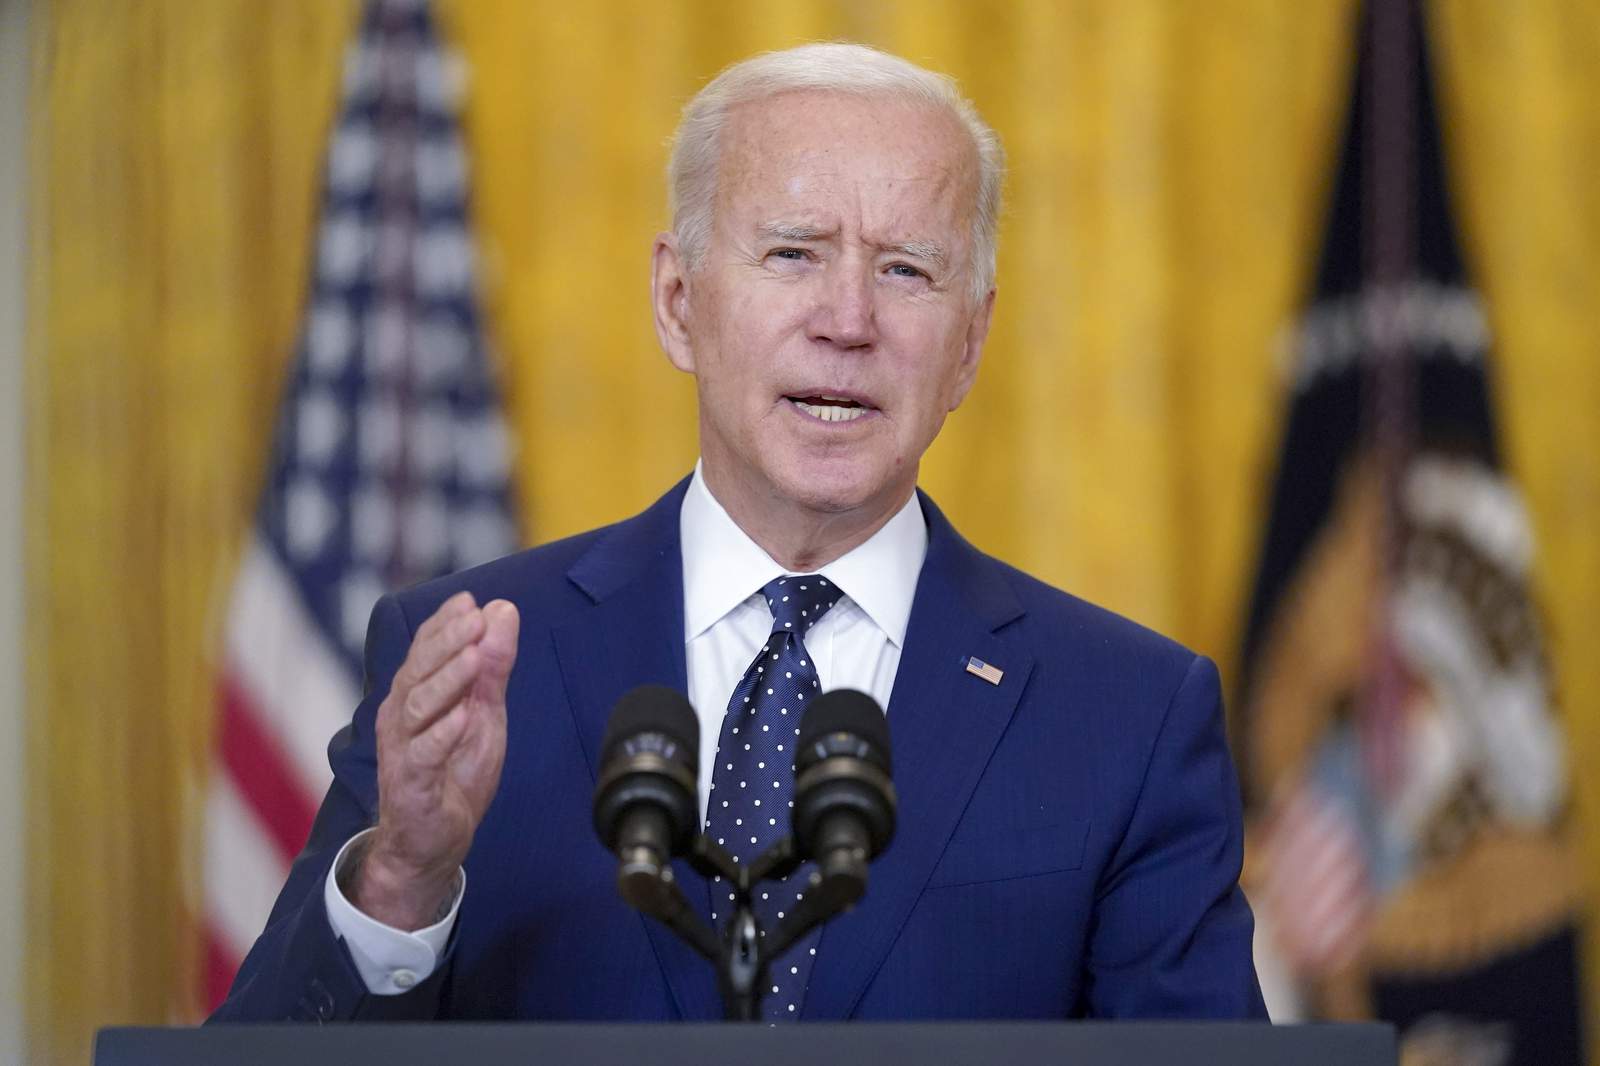 As Biden improves with vets, Afghanistan plan a plus to some